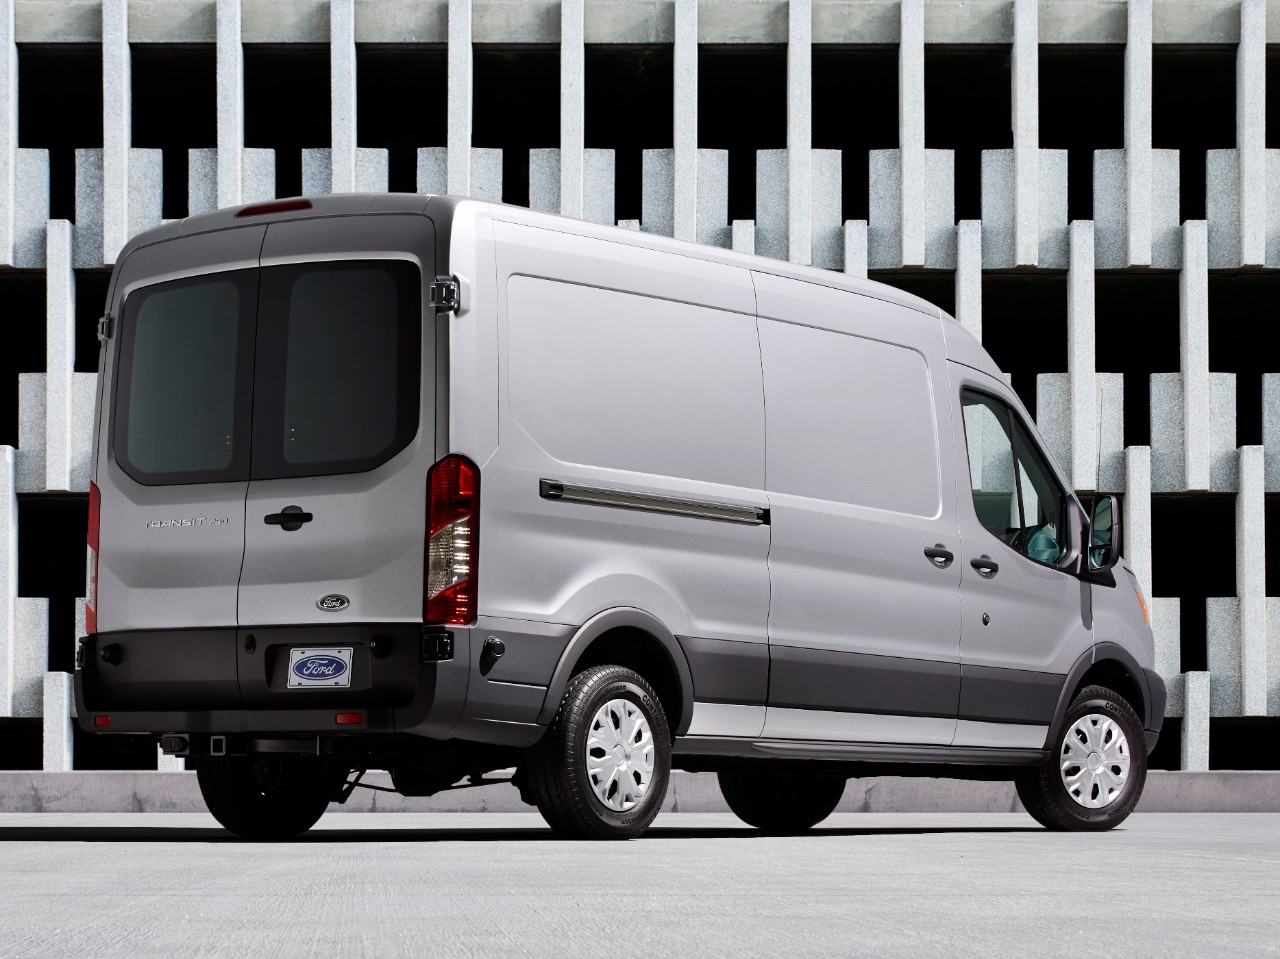 America’s Businesses Turn to Ford Vans as Economy Grows; Ford Vans Are Top Sellers in 47 States